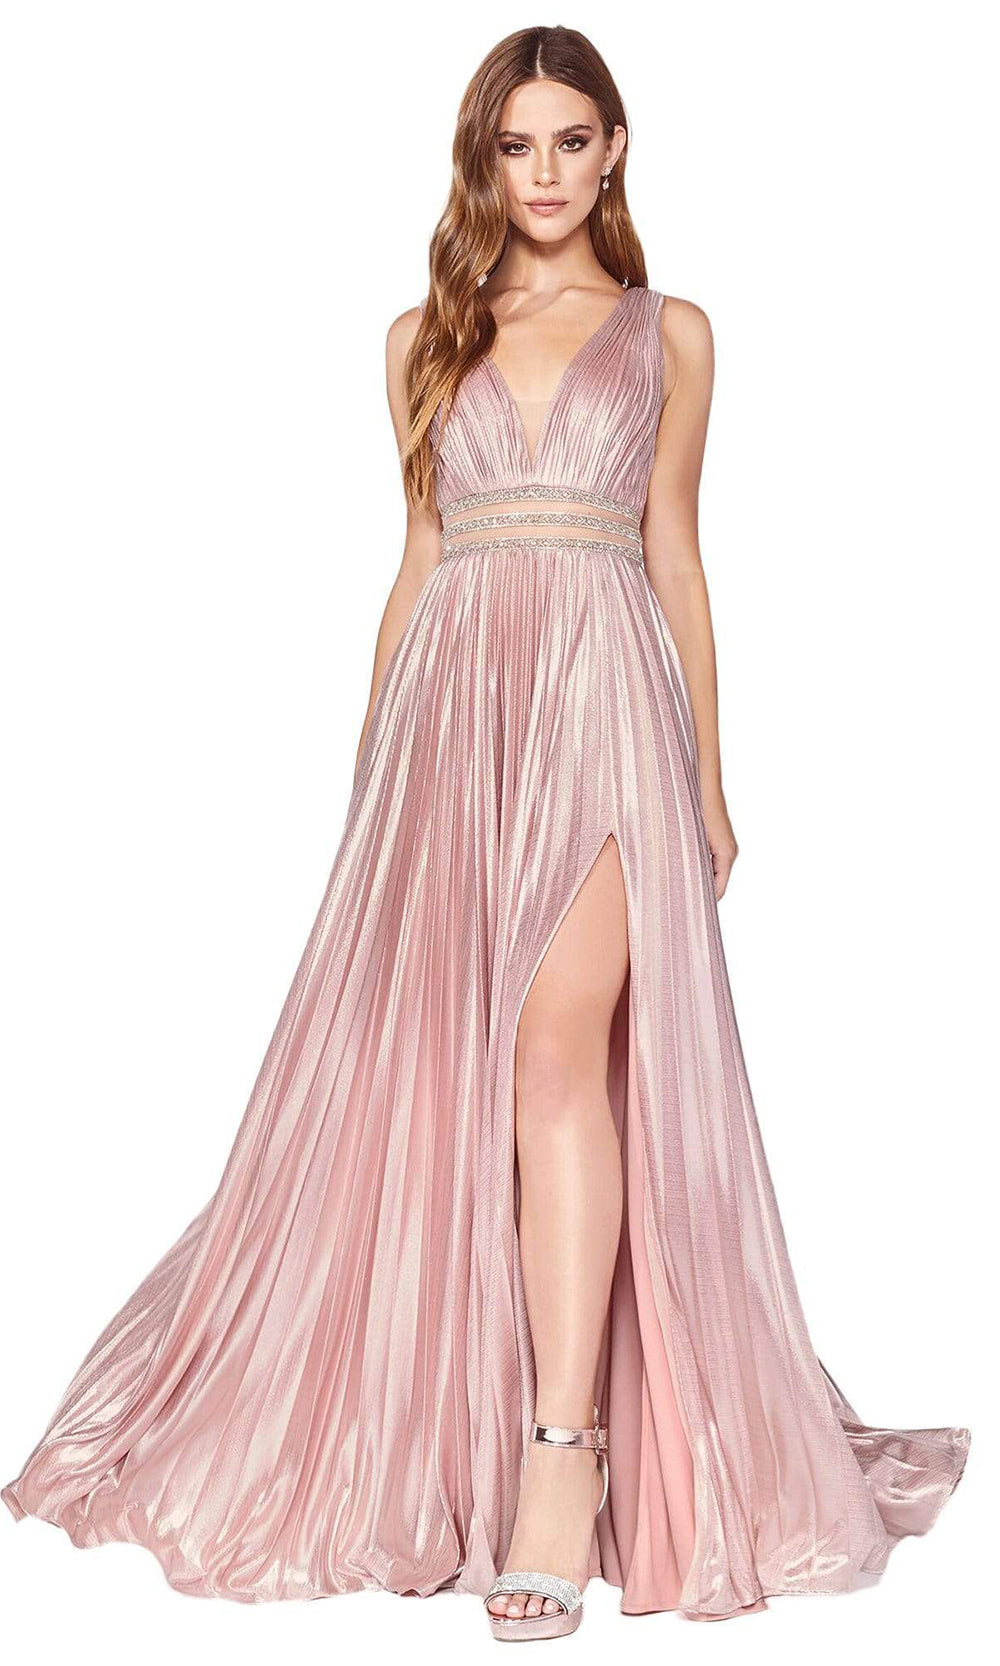 Cinderella Divine - Deep V-neck Beaded A-line Gown CJ537 - 1 pc Blush In Size 4 Available CCSALE 4 / Blush